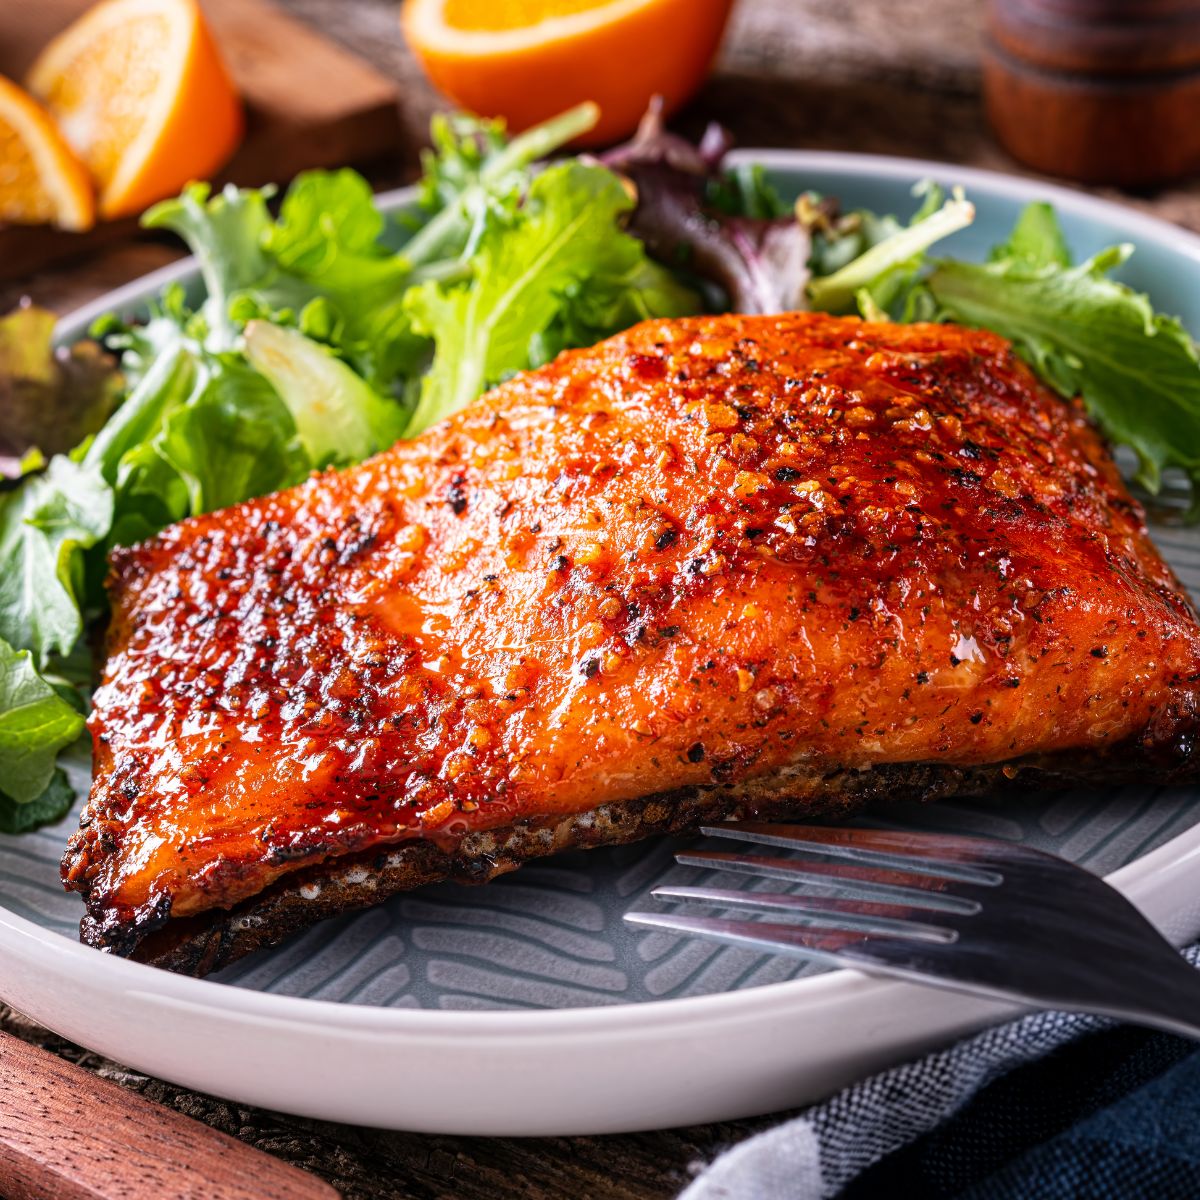 Honey-glazed salmon with a side of salad